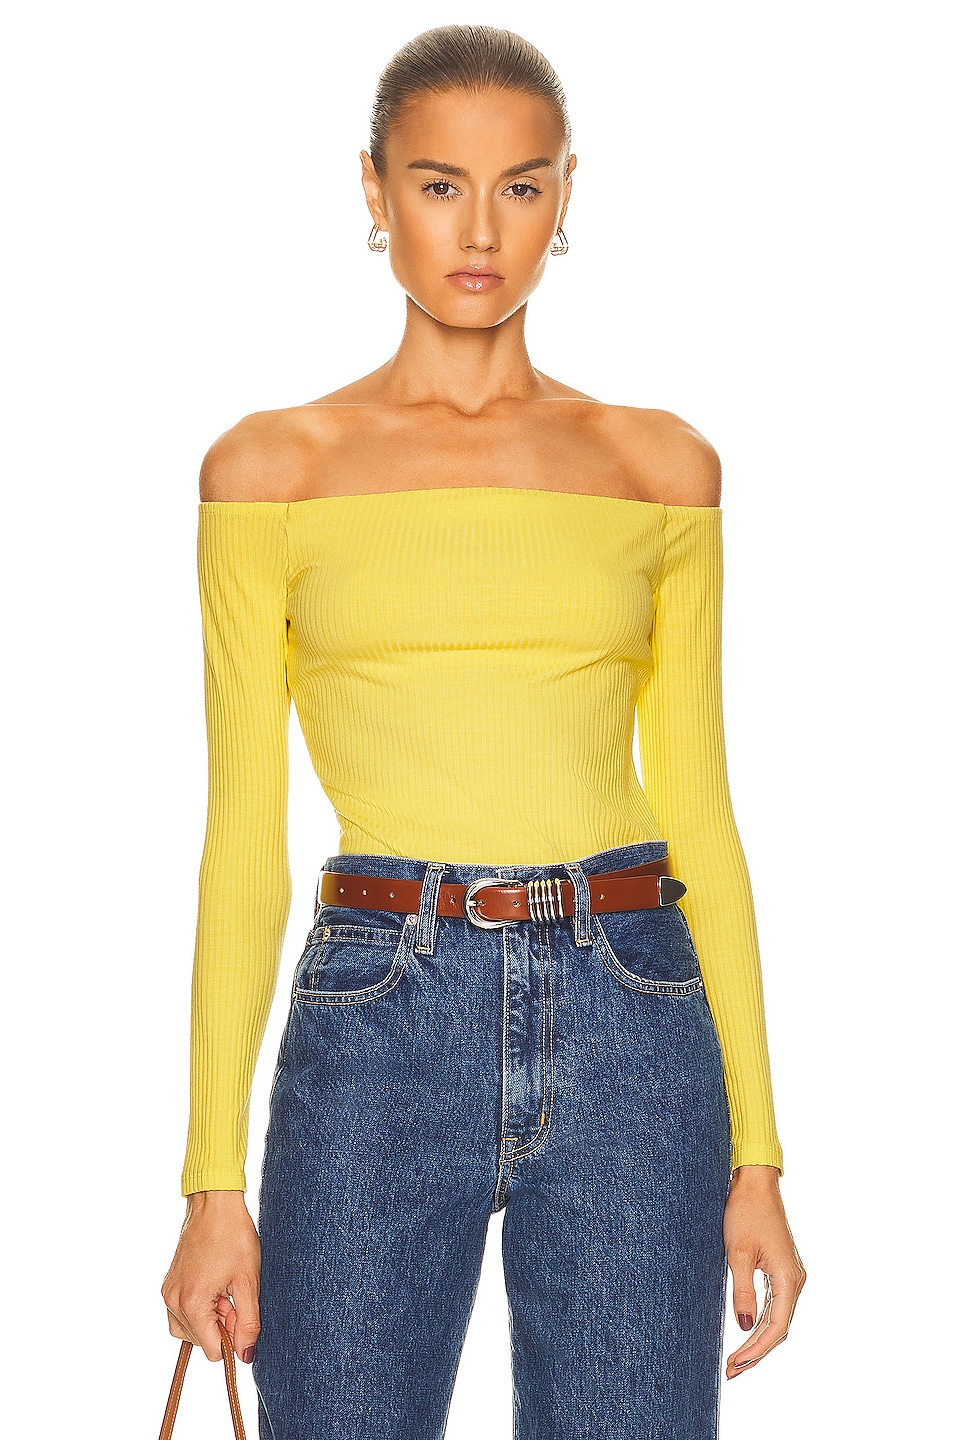 Enza Costa A Coste Off Shoulder Long Sleeve Top in Yellow | FWRD